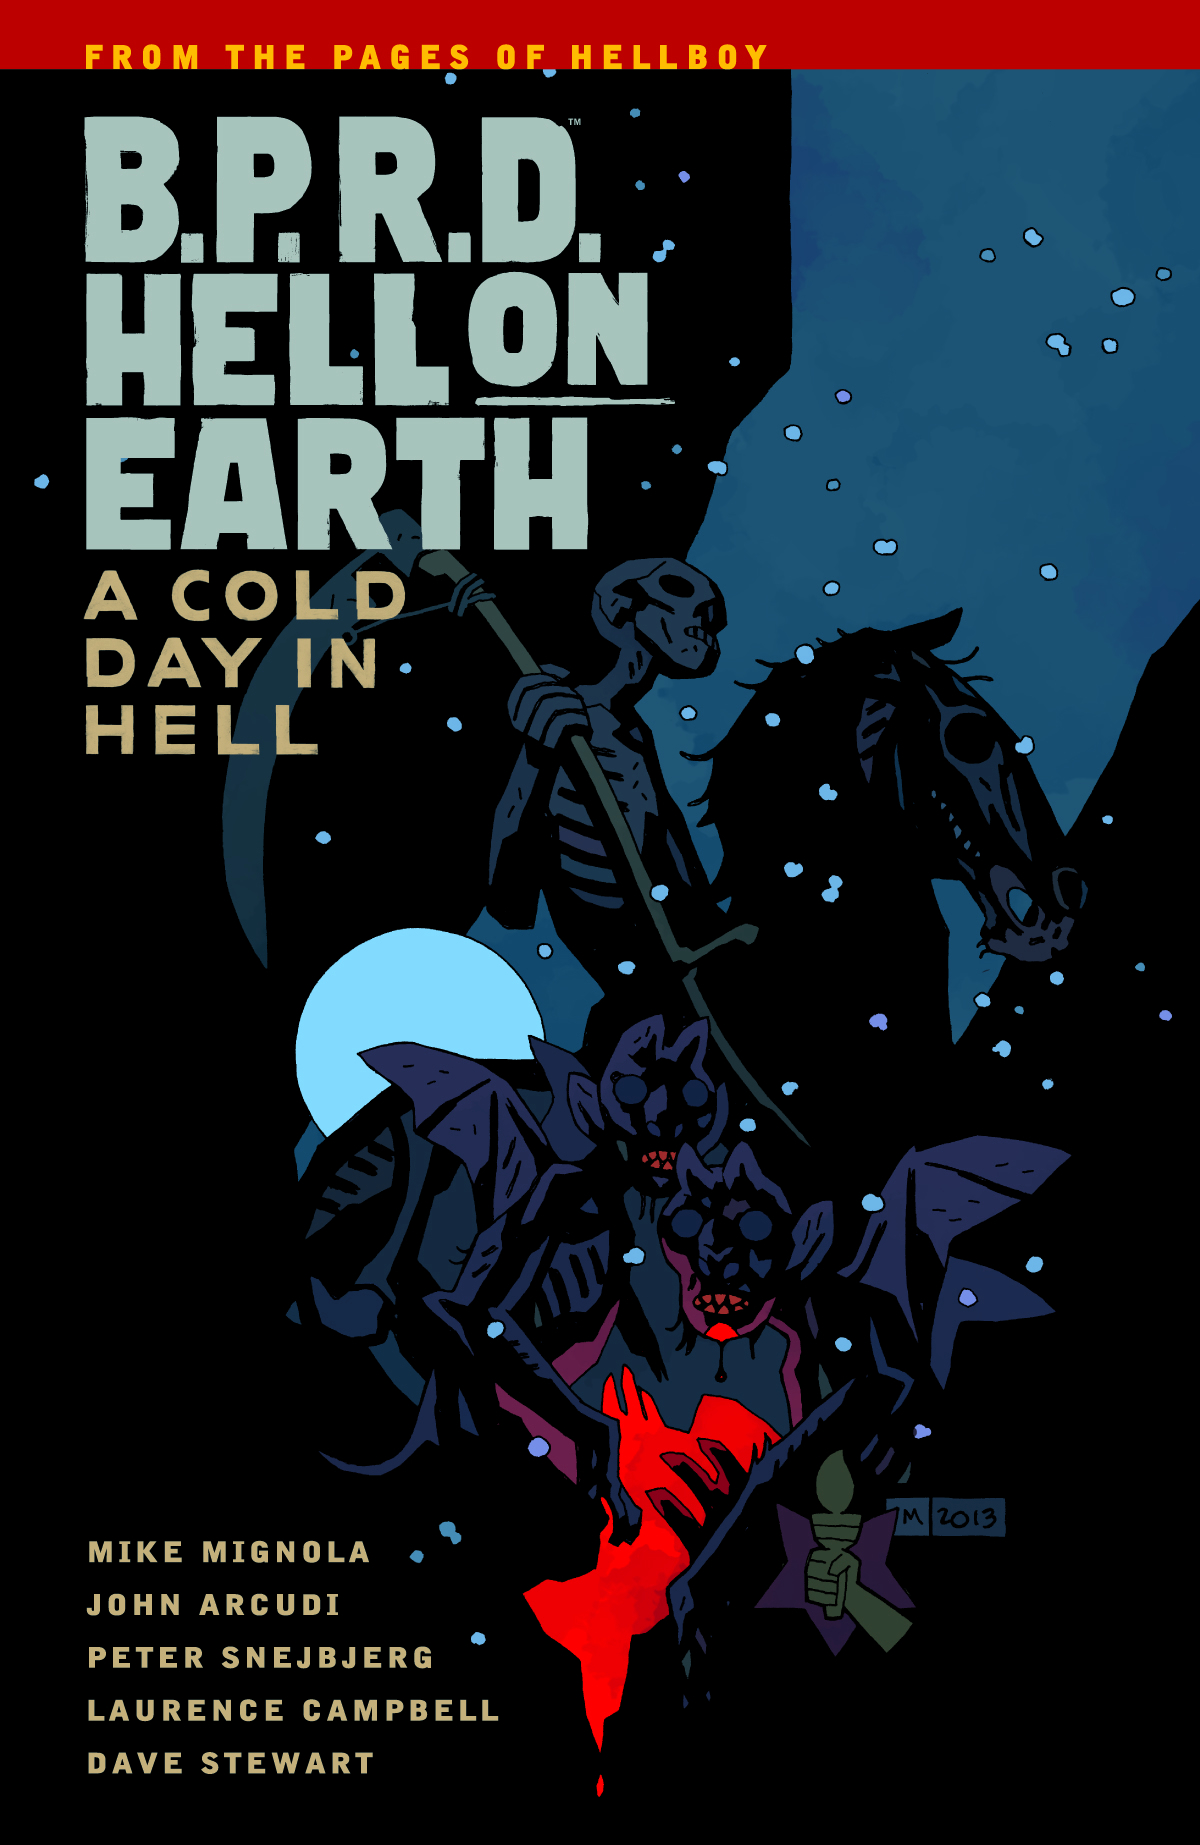 BPRD HELL ON EARTH TP VOL 07 A COLD DAY IN HELL